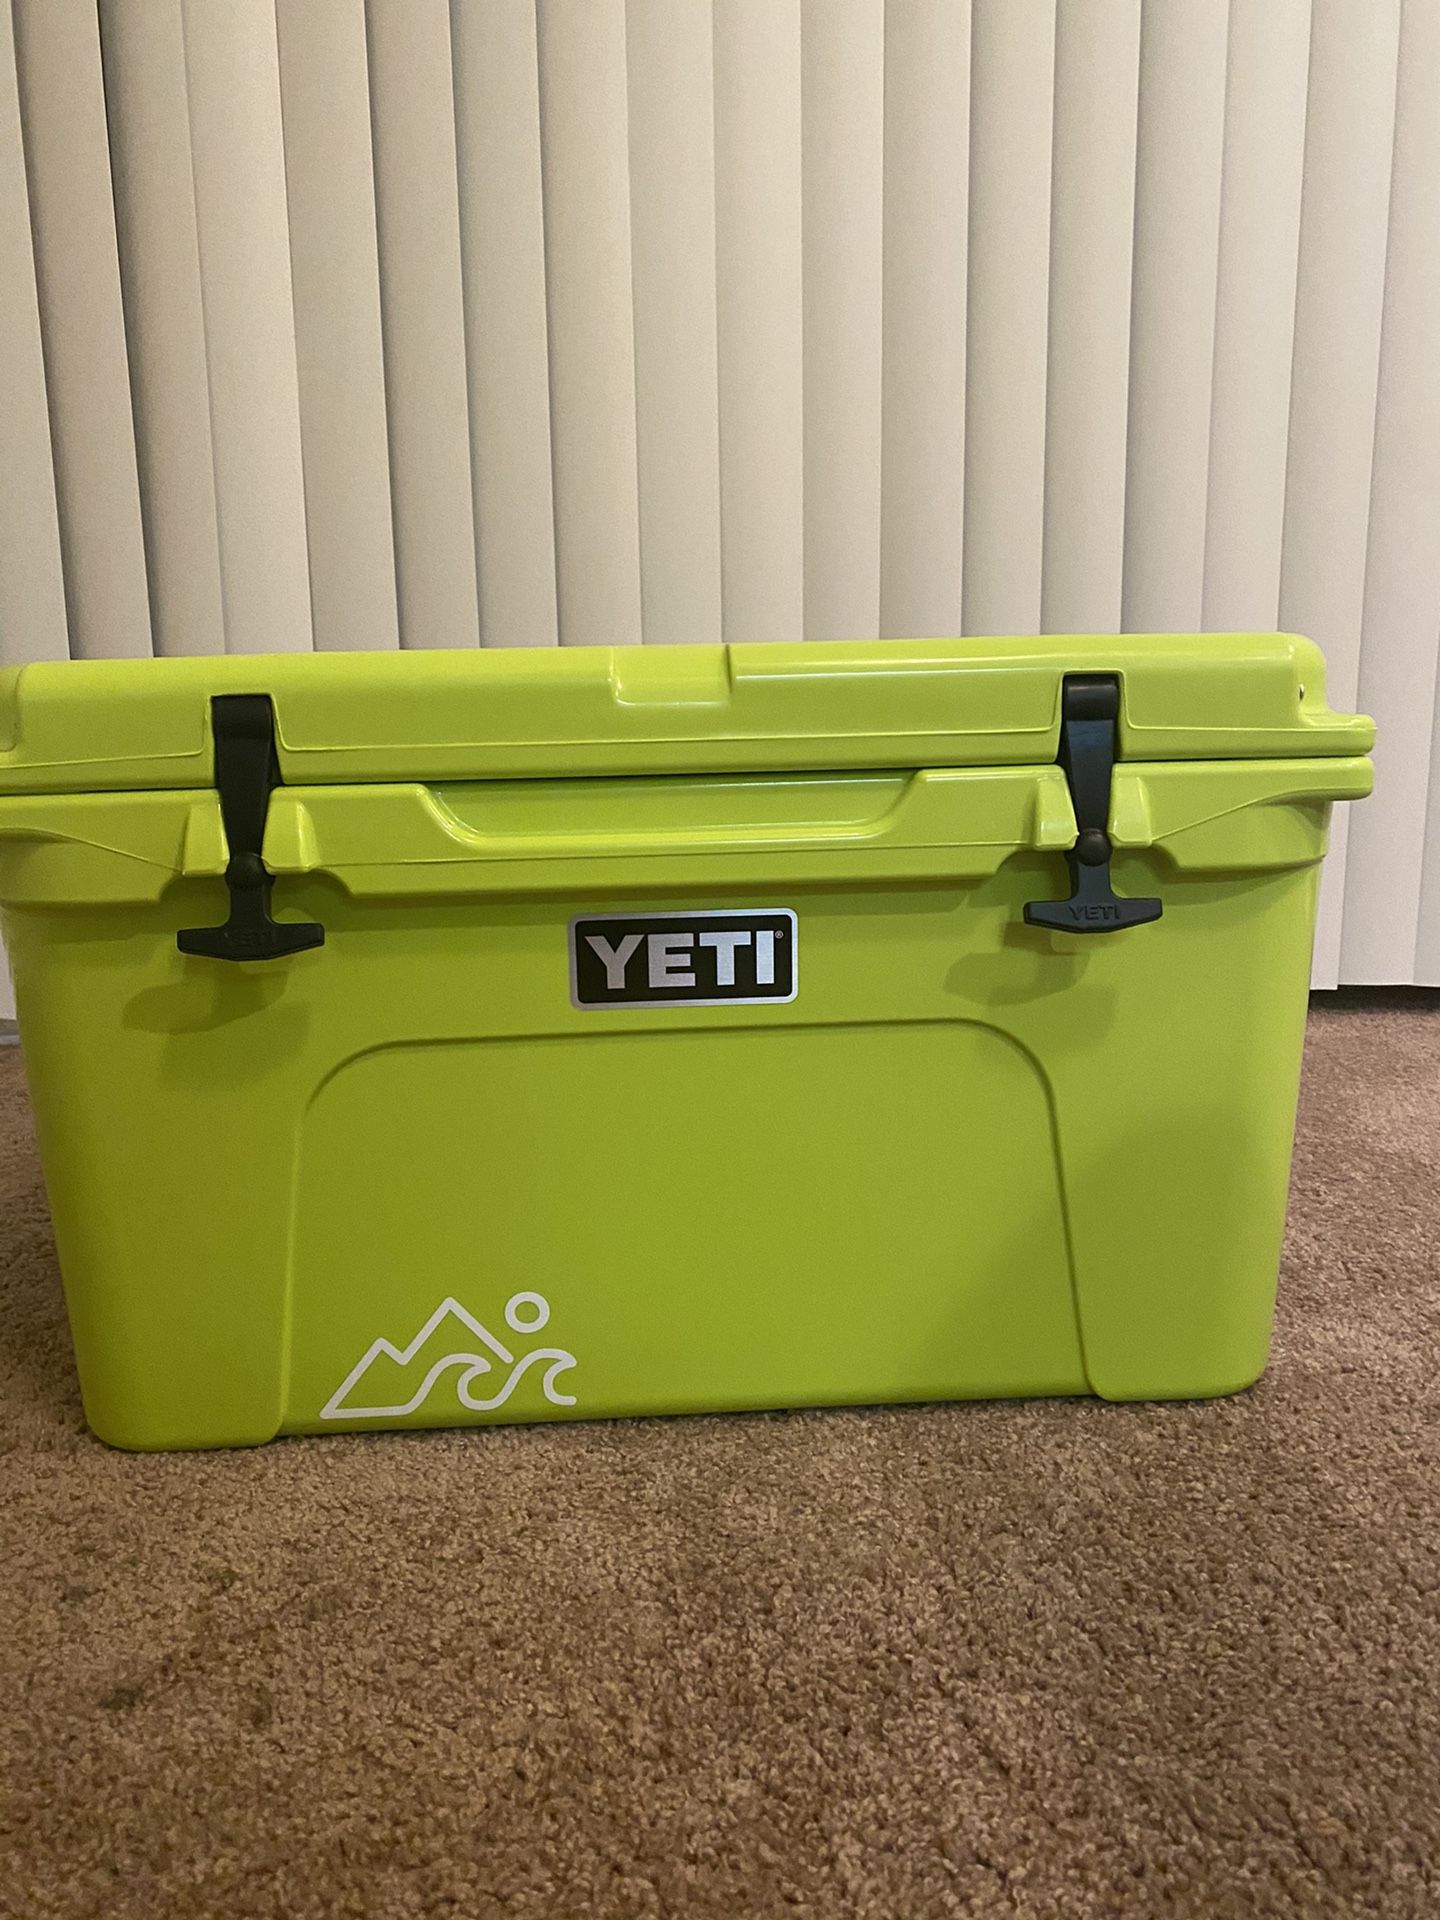 Never been used 45 YETI Cooler. No scratches or marks. Sad to let this go but need the money :(